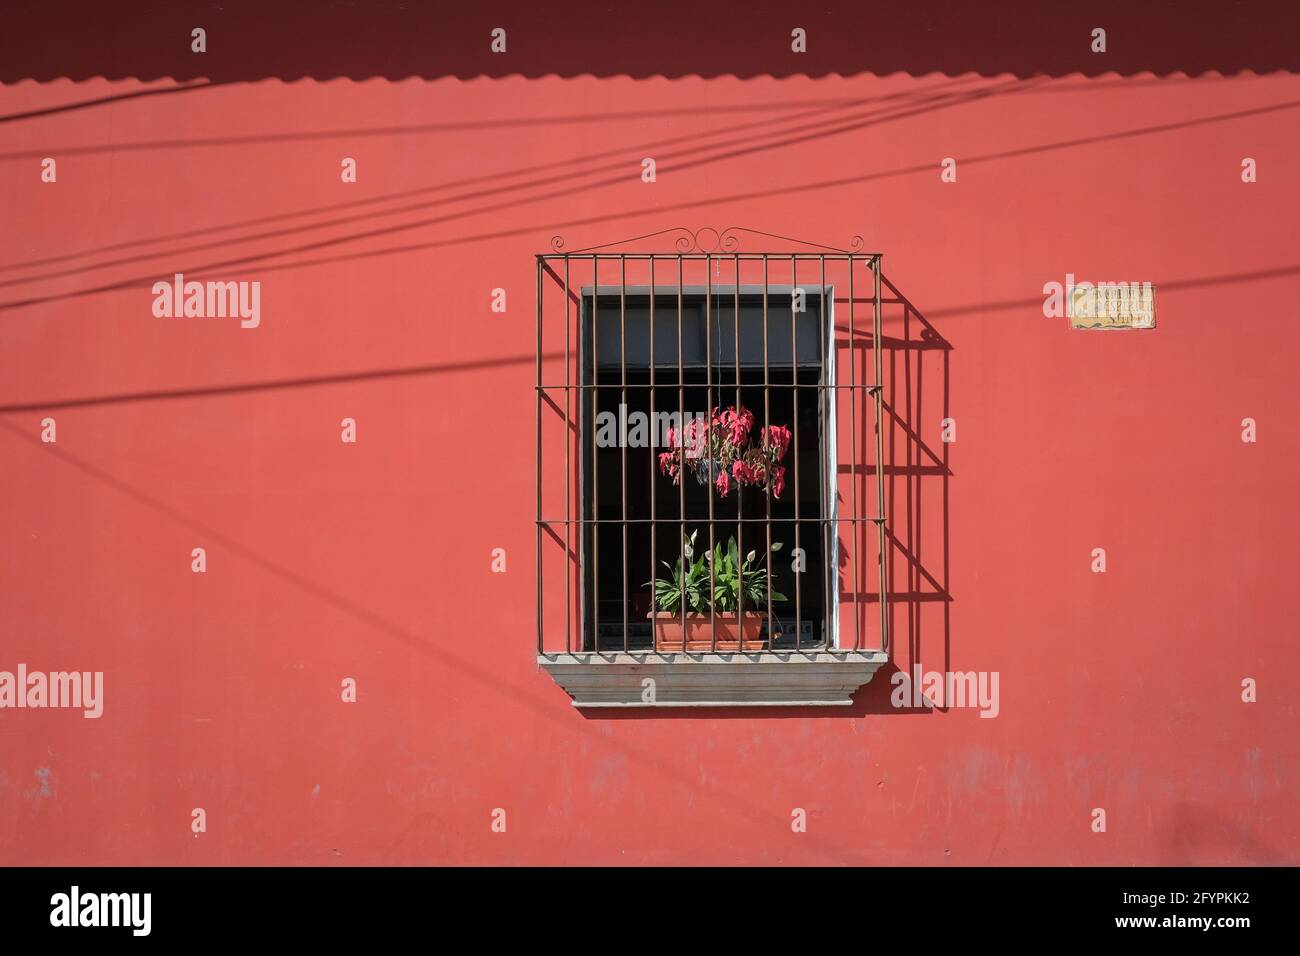 Plants in an open window behind a metallic grille counterpoint a bright red wall in Antigua, Guatemala Stock Photo